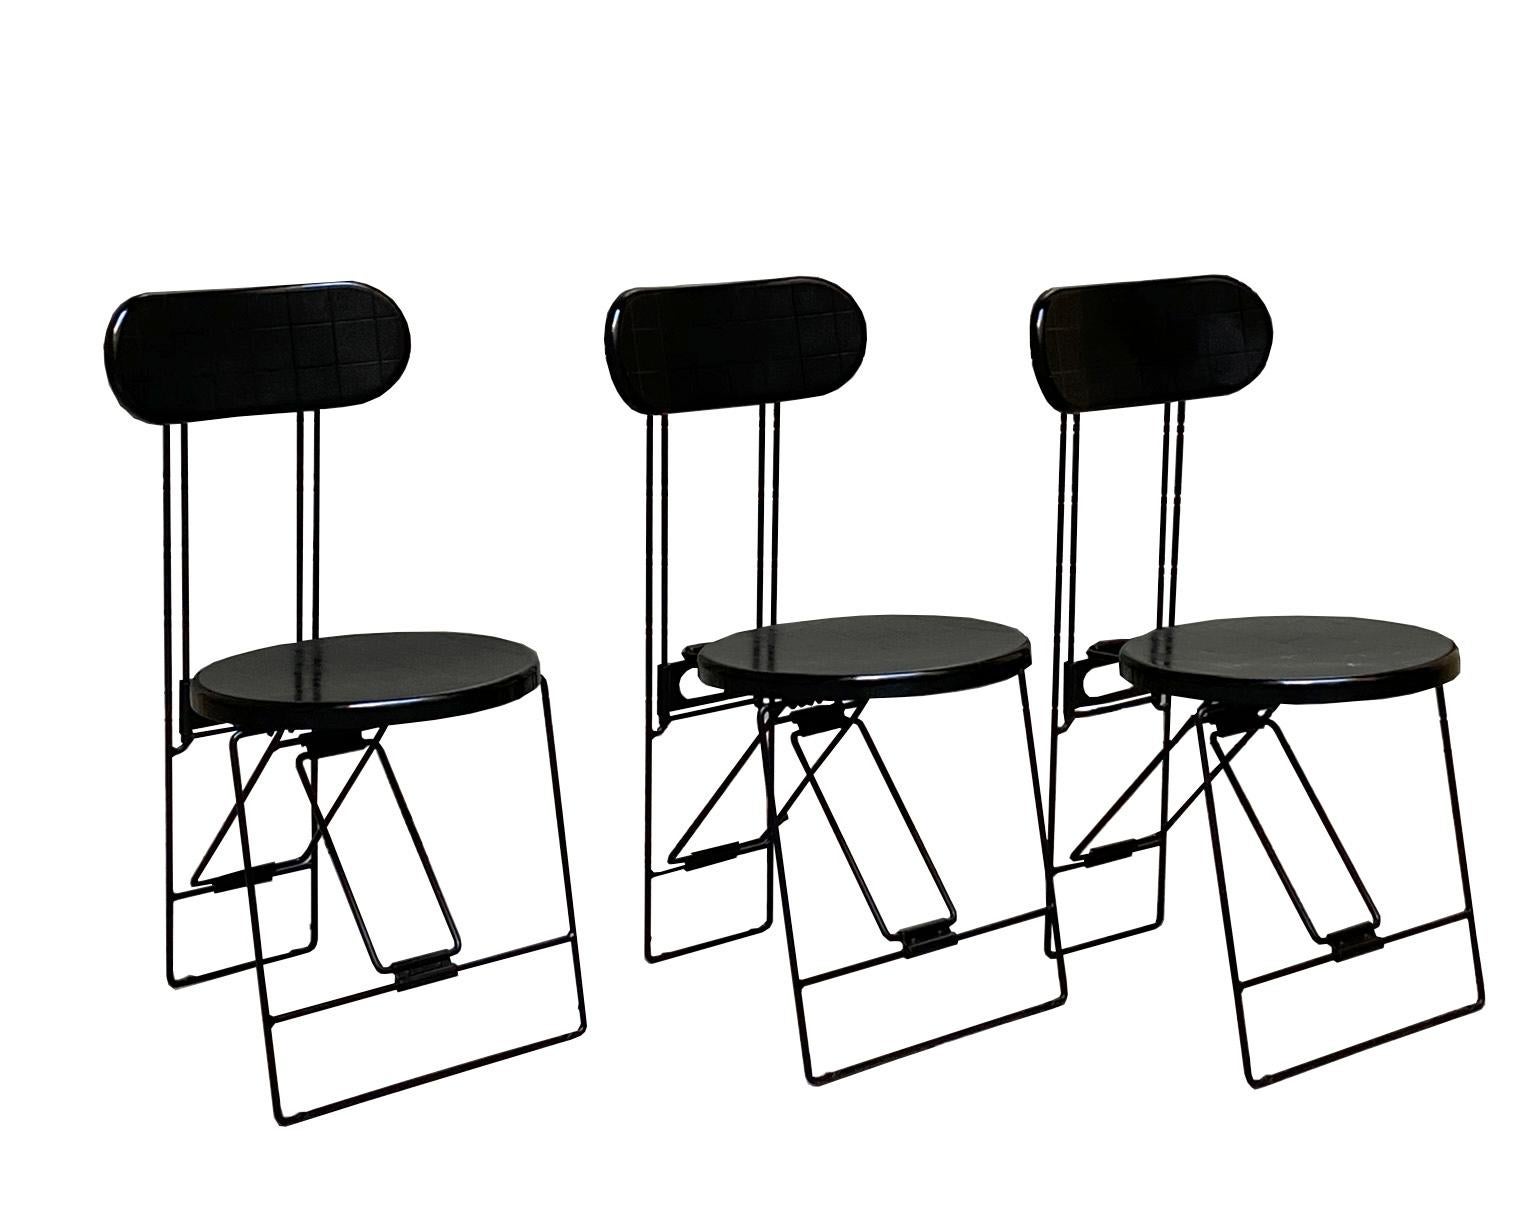 The chair was designed by Andries van Onck and Kazuma Yamaguchi for Magis, Italy.
Memphis style folding chairs from 1983.
The seating and the back is made of heavy quality black pvc.
The black-coated frame is made of massive wire steel.
 